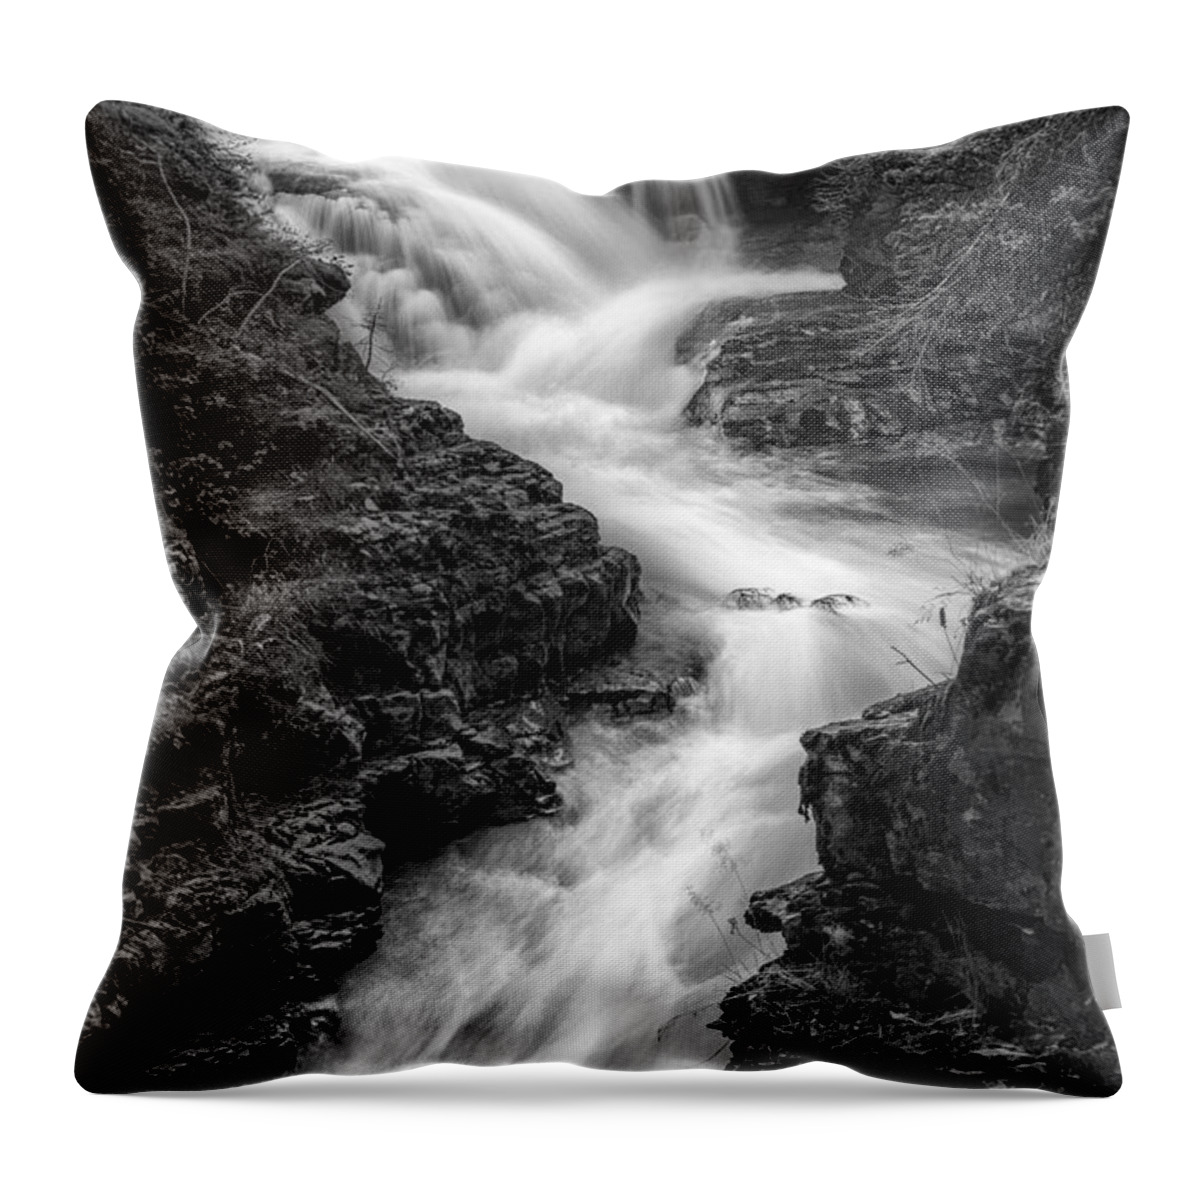 Art Throw Pillow featuring the photograph Down the Stream by Jon Glaser